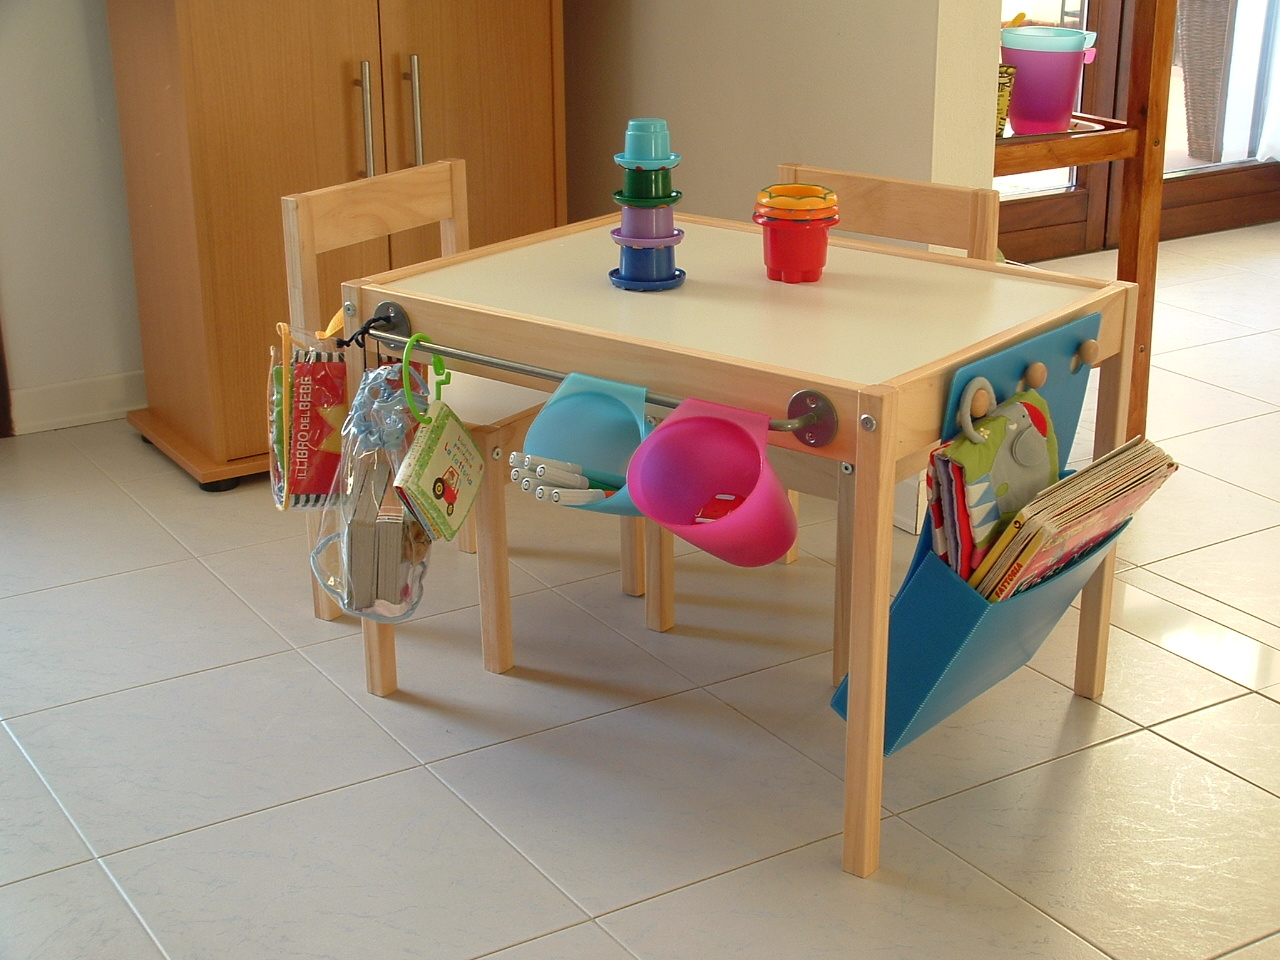 ikea table and chairs for kids